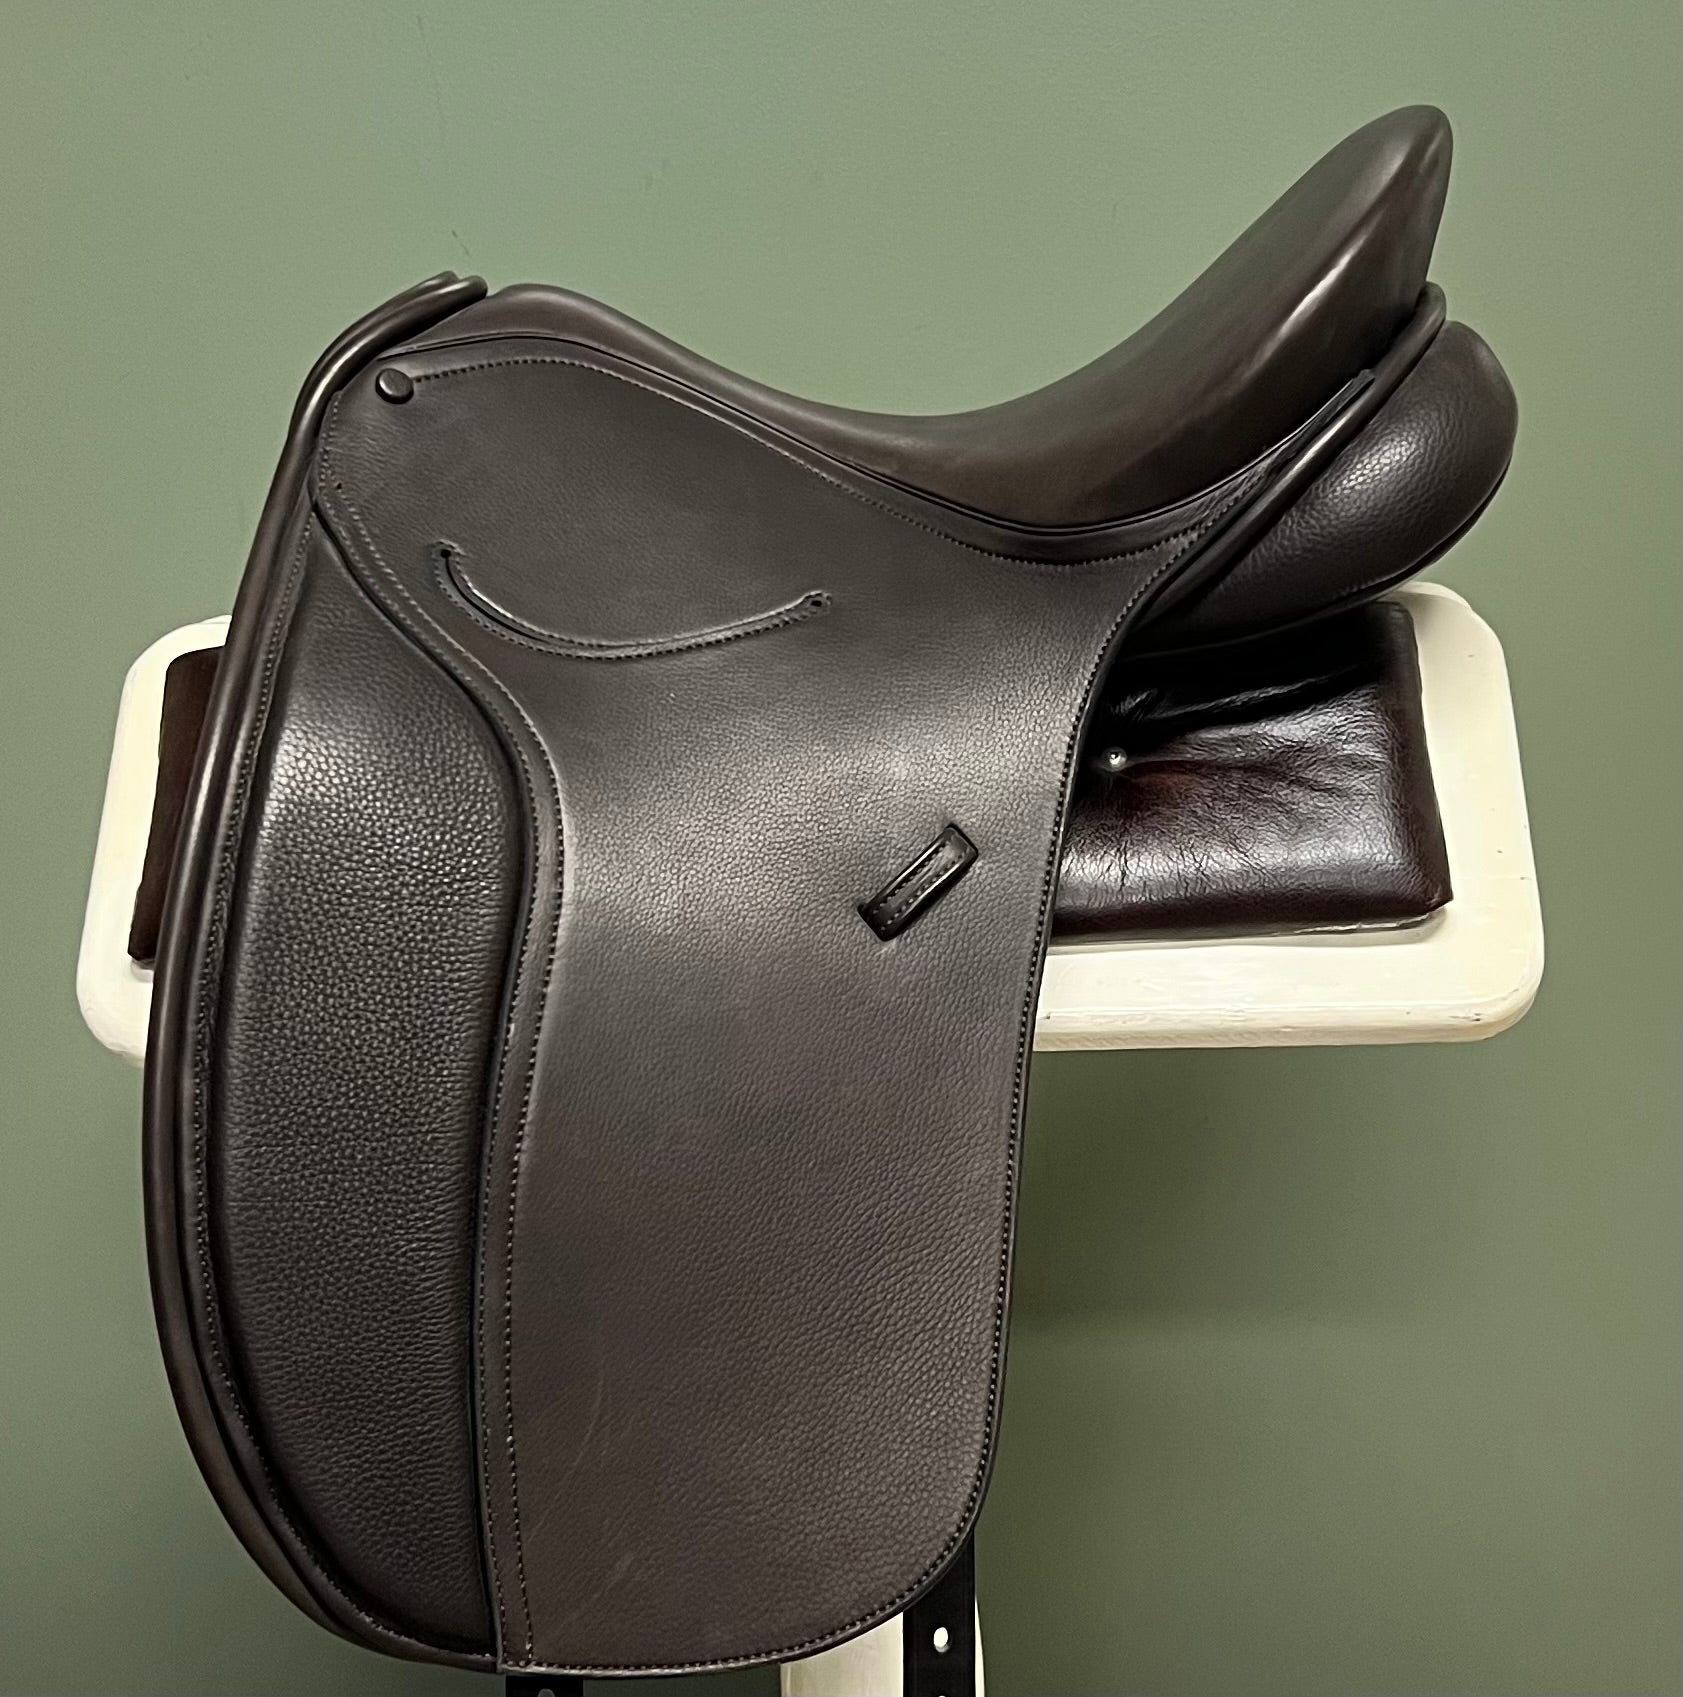 STOCK CLEARANCE - PH Royal 2 Saddle - 17" in Dark Havana featuring covered buttons